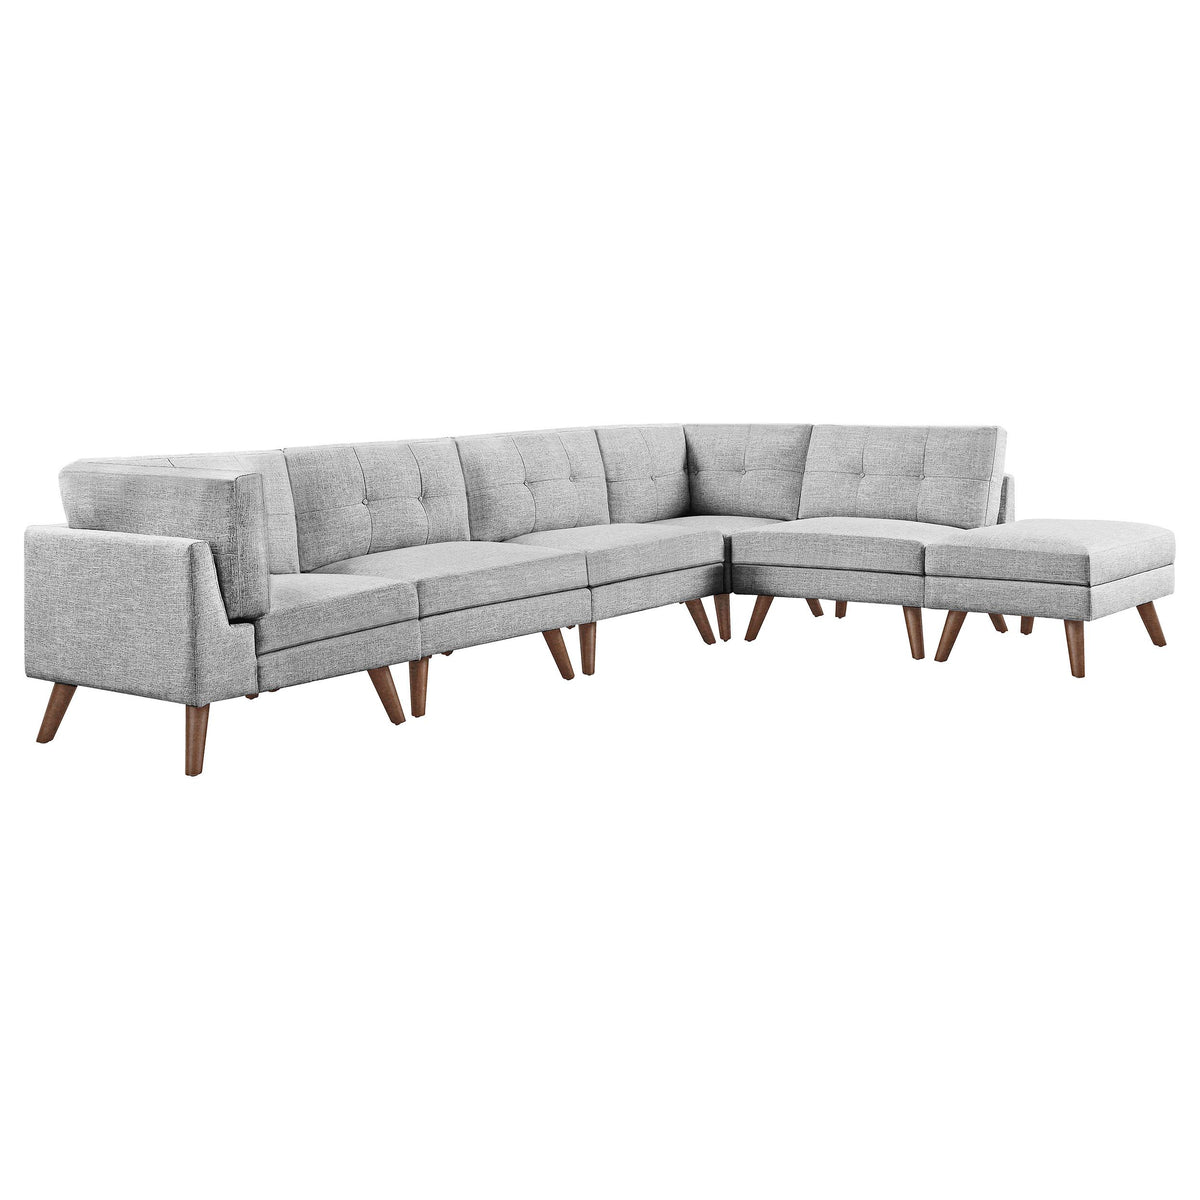 Churchill 6-piece Upholstered Modular Tufted Sectional Grey and Walnut Churchill 6-piece Upholstered Modular Tufted Sectional Grey and Walnut Half Price Furniture